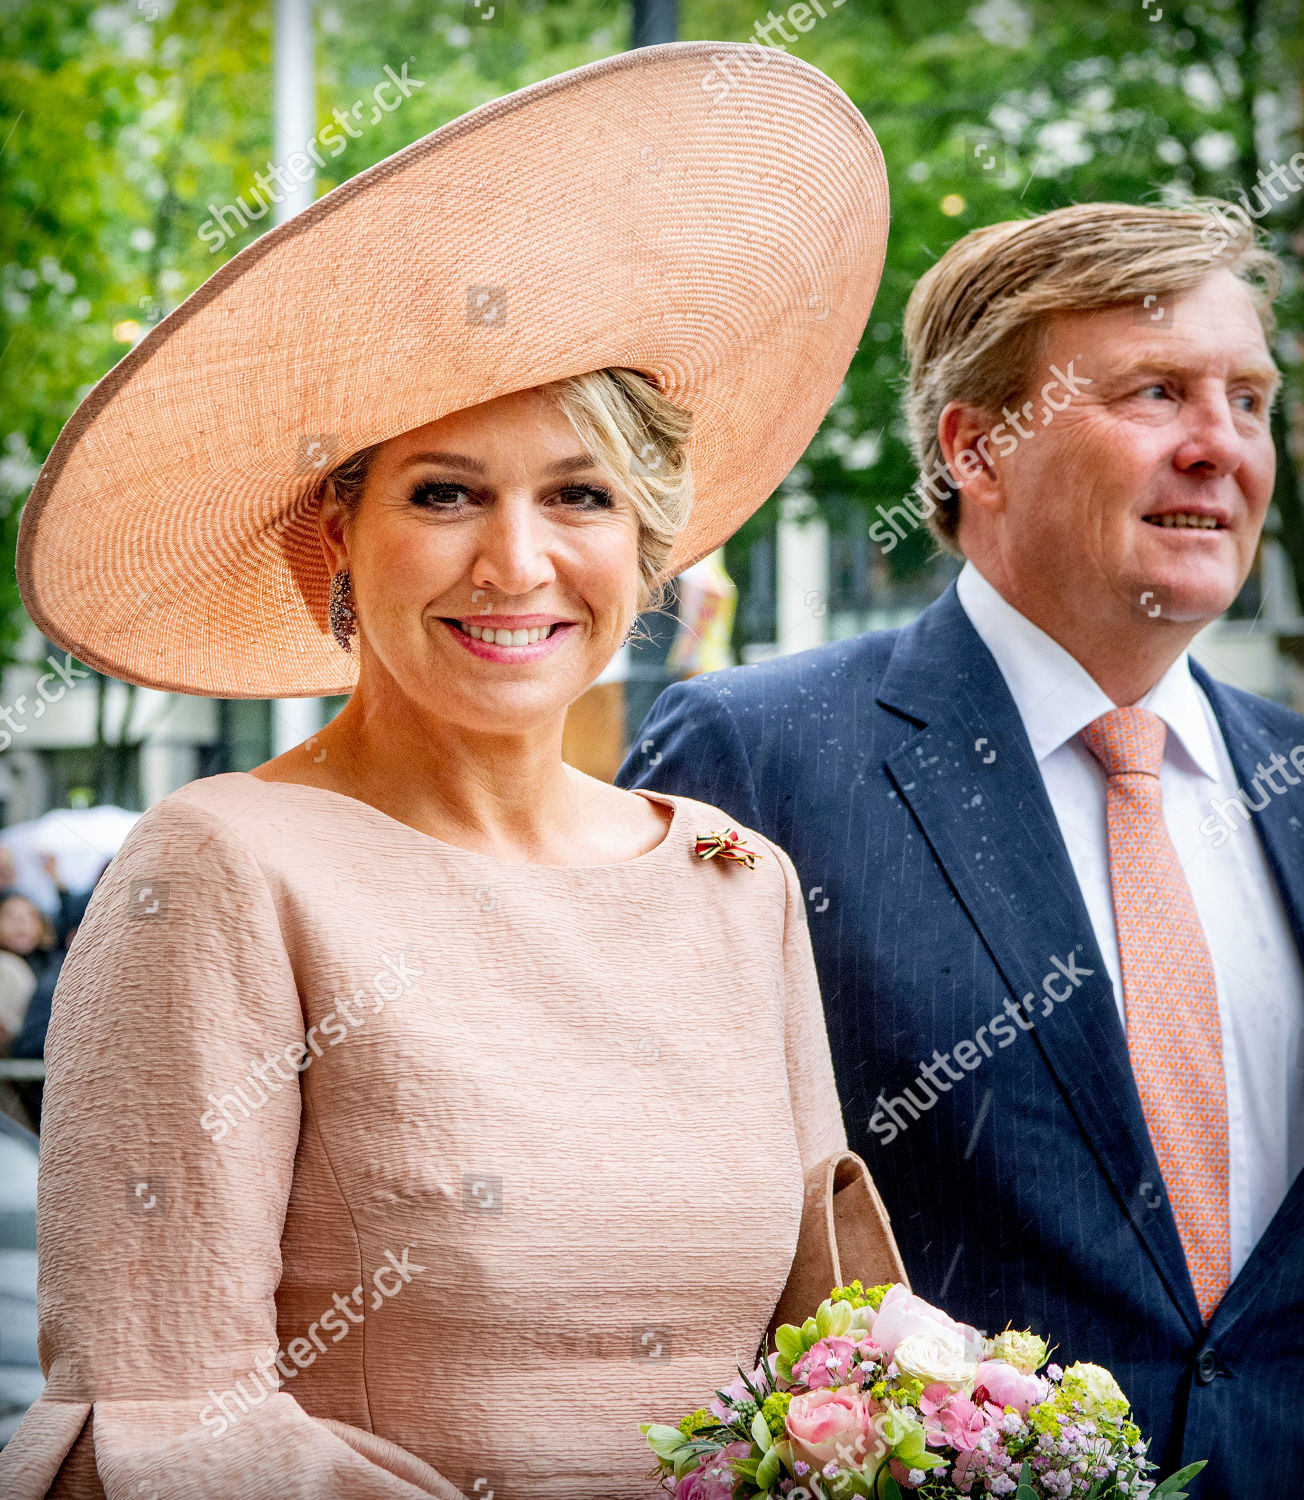 king-willem-alexander-and-queen-maxima-visit-to-germany-shutterstock-editorial-10243489bo.jpg